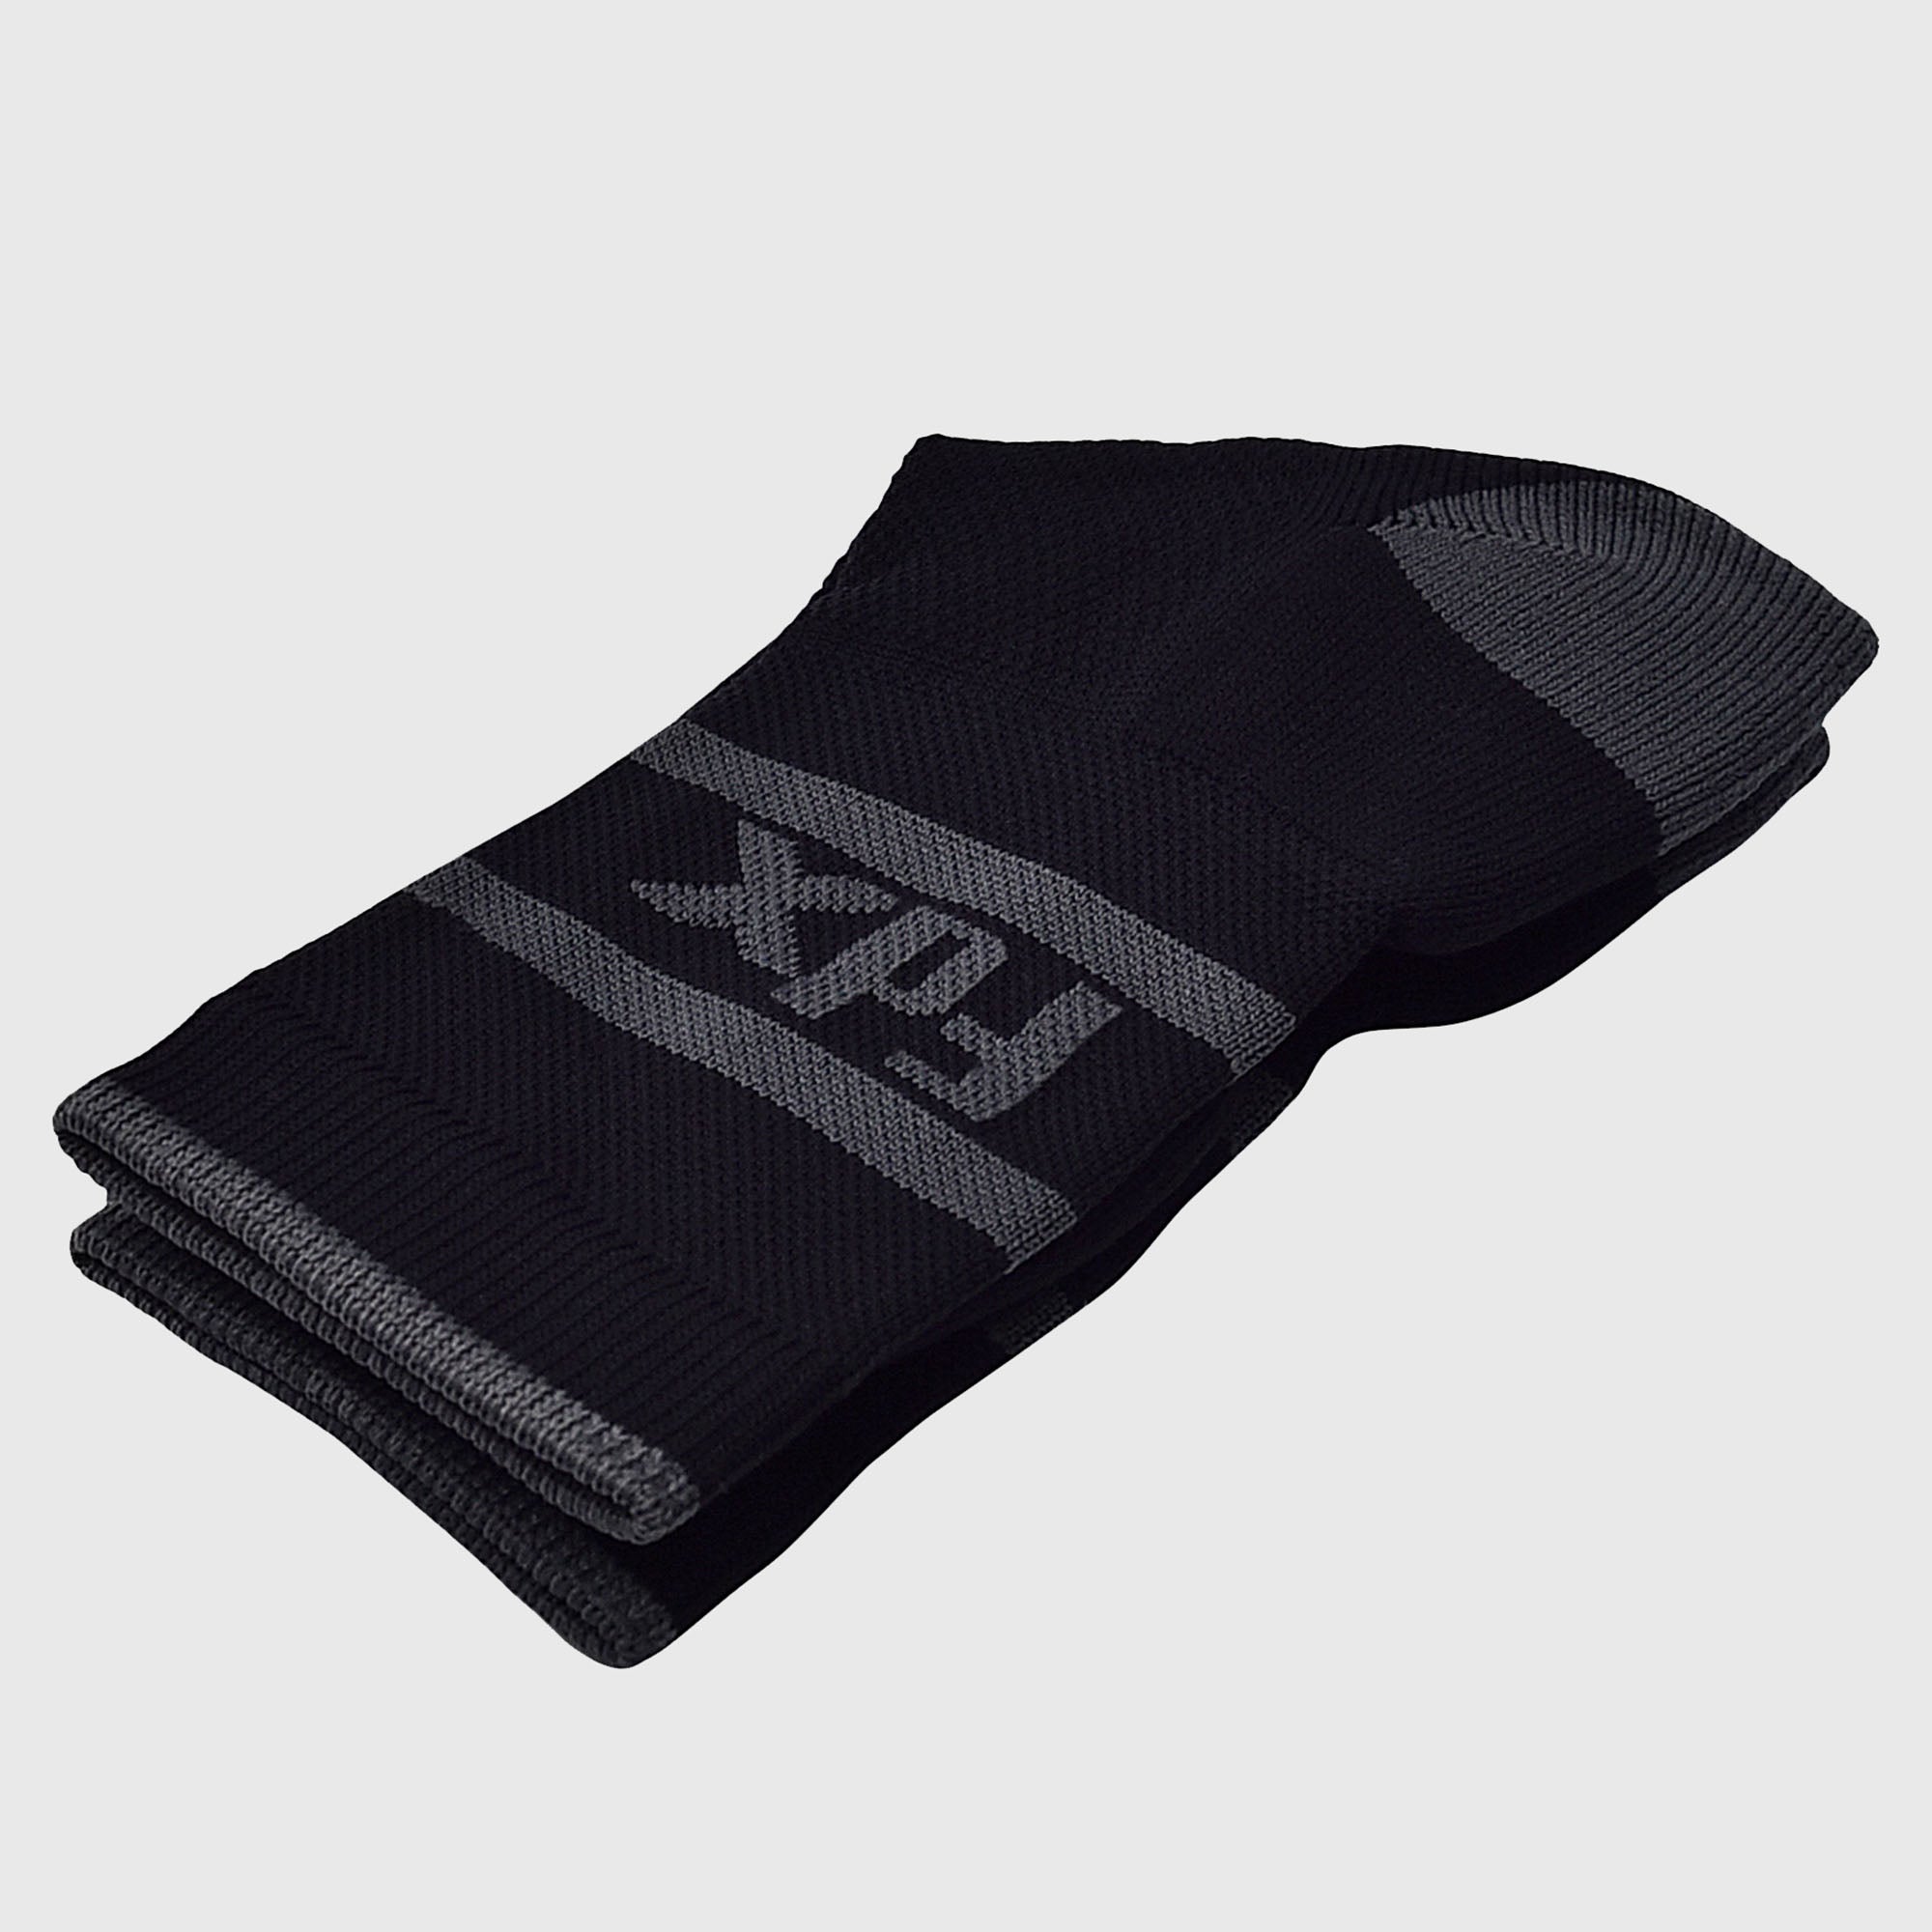 Fdx Black Compression Socks for Cycling & Running